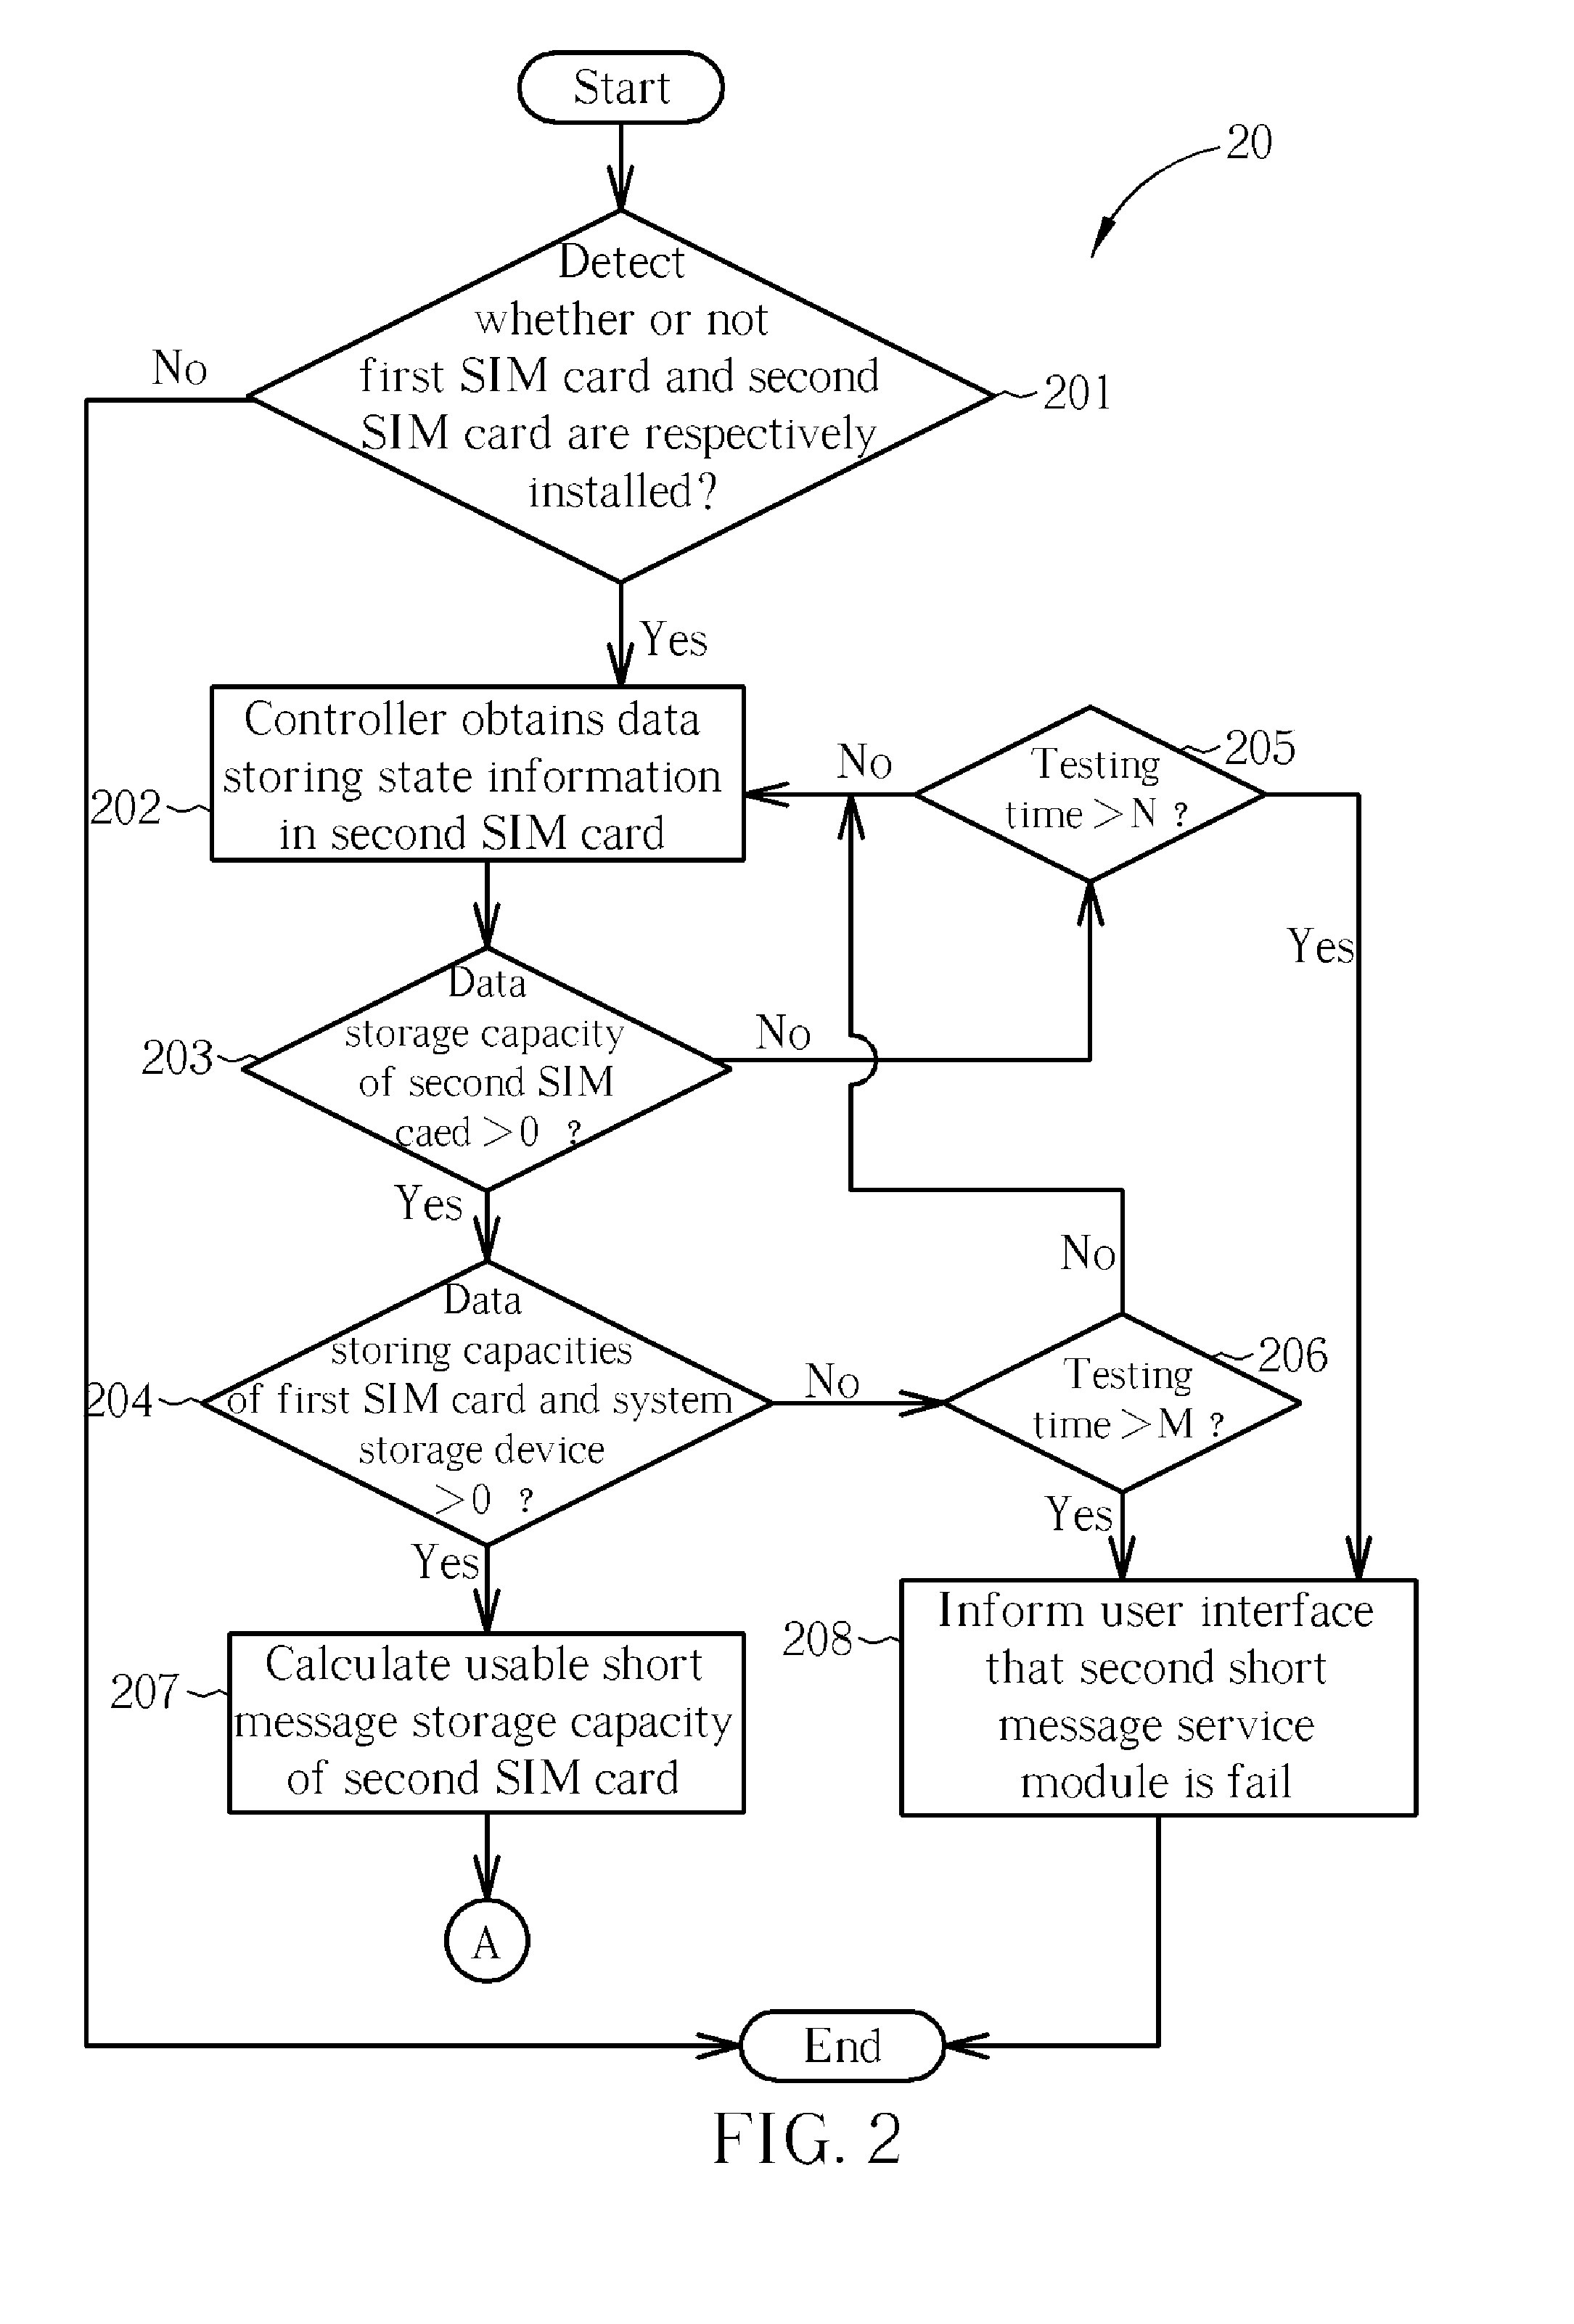 Communication apparatus capable of accessing multiple telecommunication networks of the same telecommunication standard